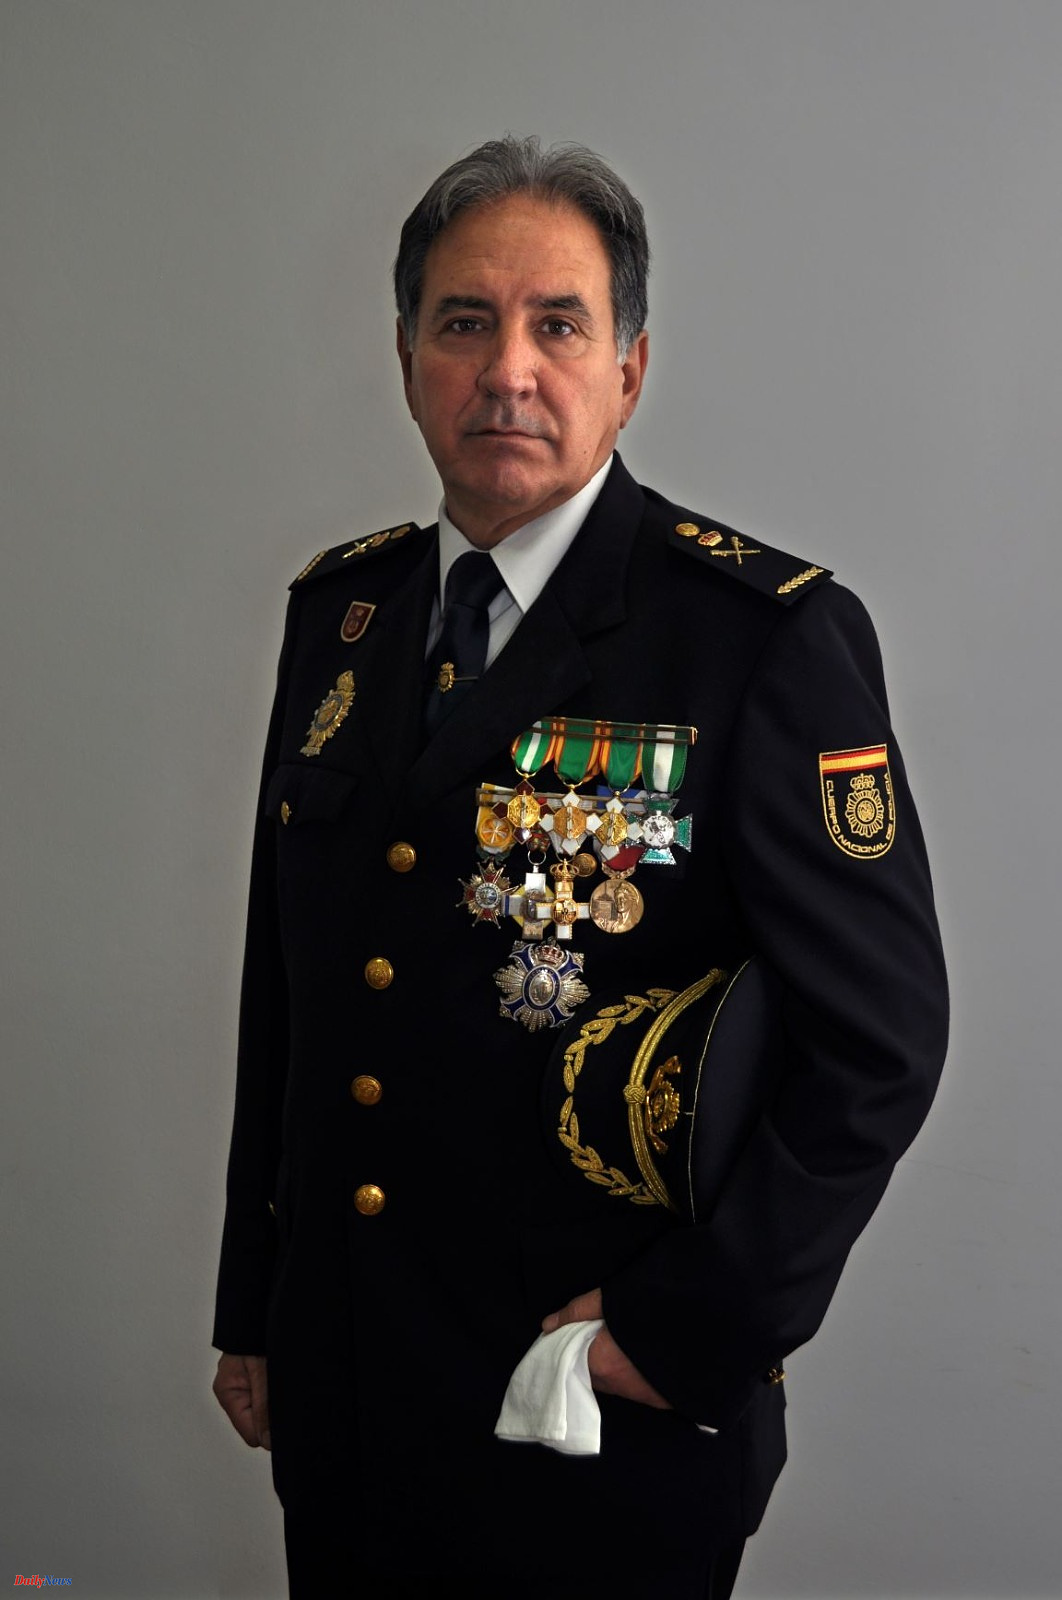 Interior Spain appoints Luis Fernando Pascual as head of the General Commission of the Judicial Police